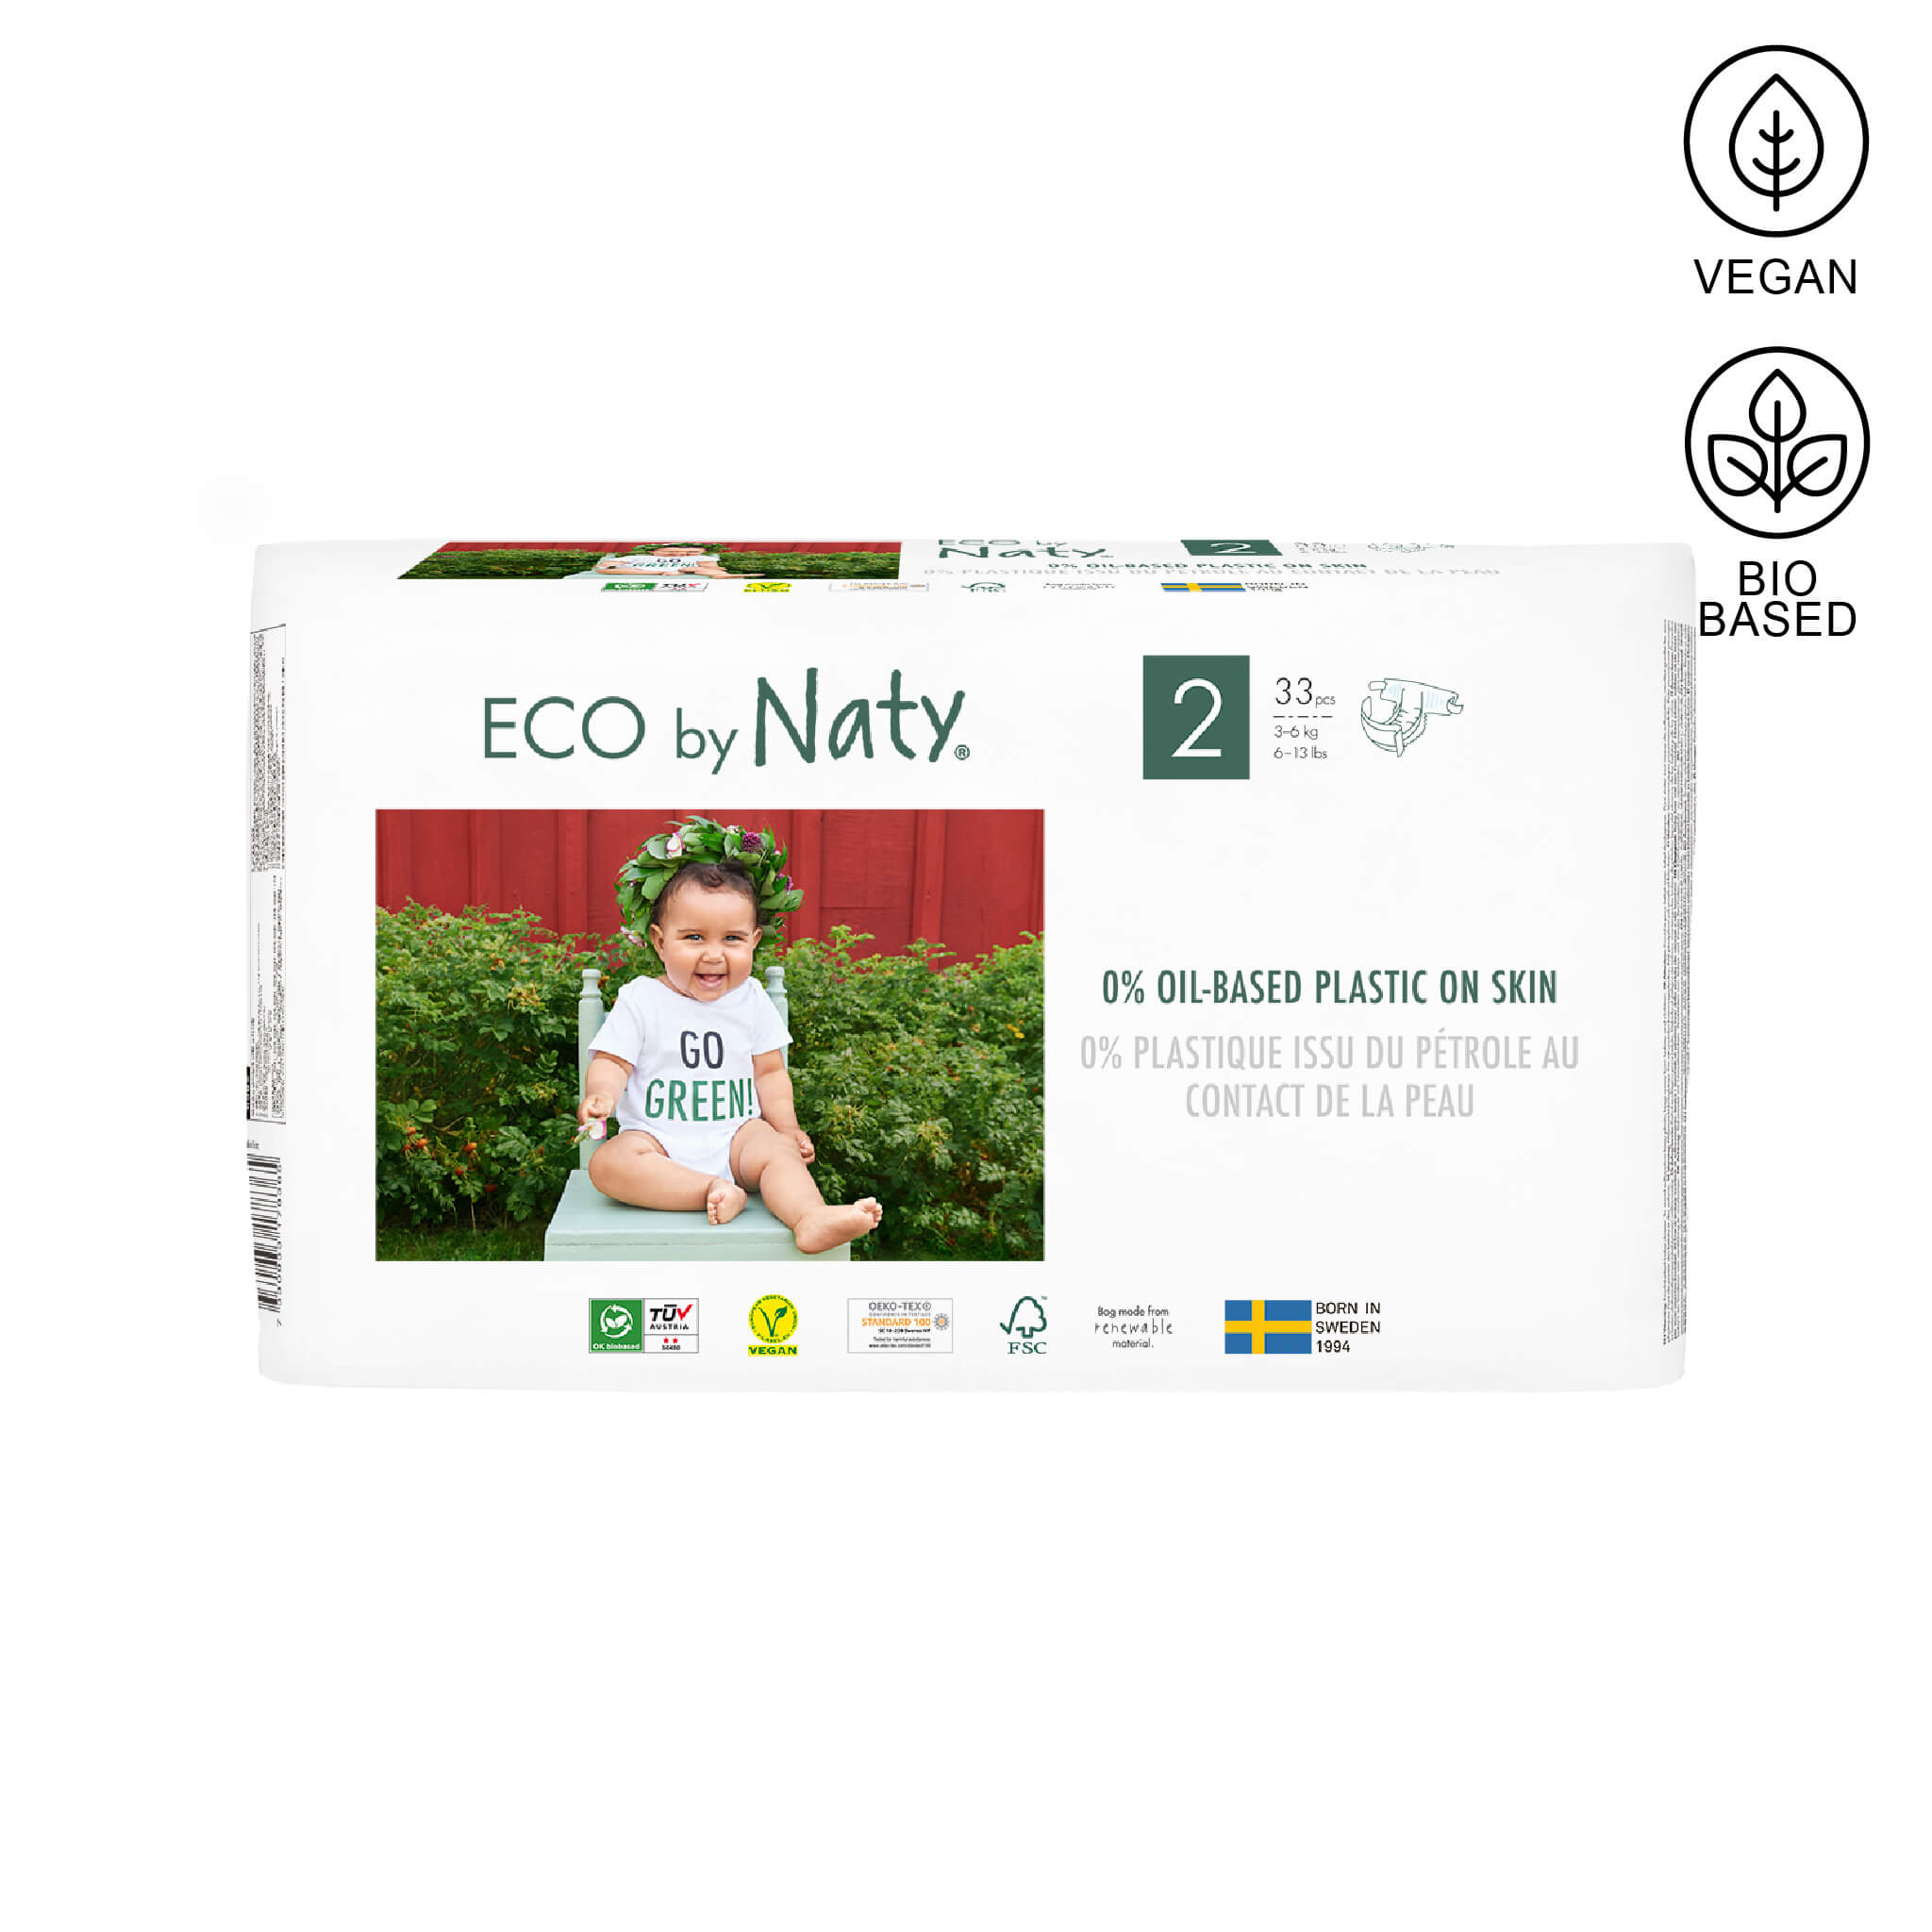 Eco by Naty Size 2 diapers package of 33 units.